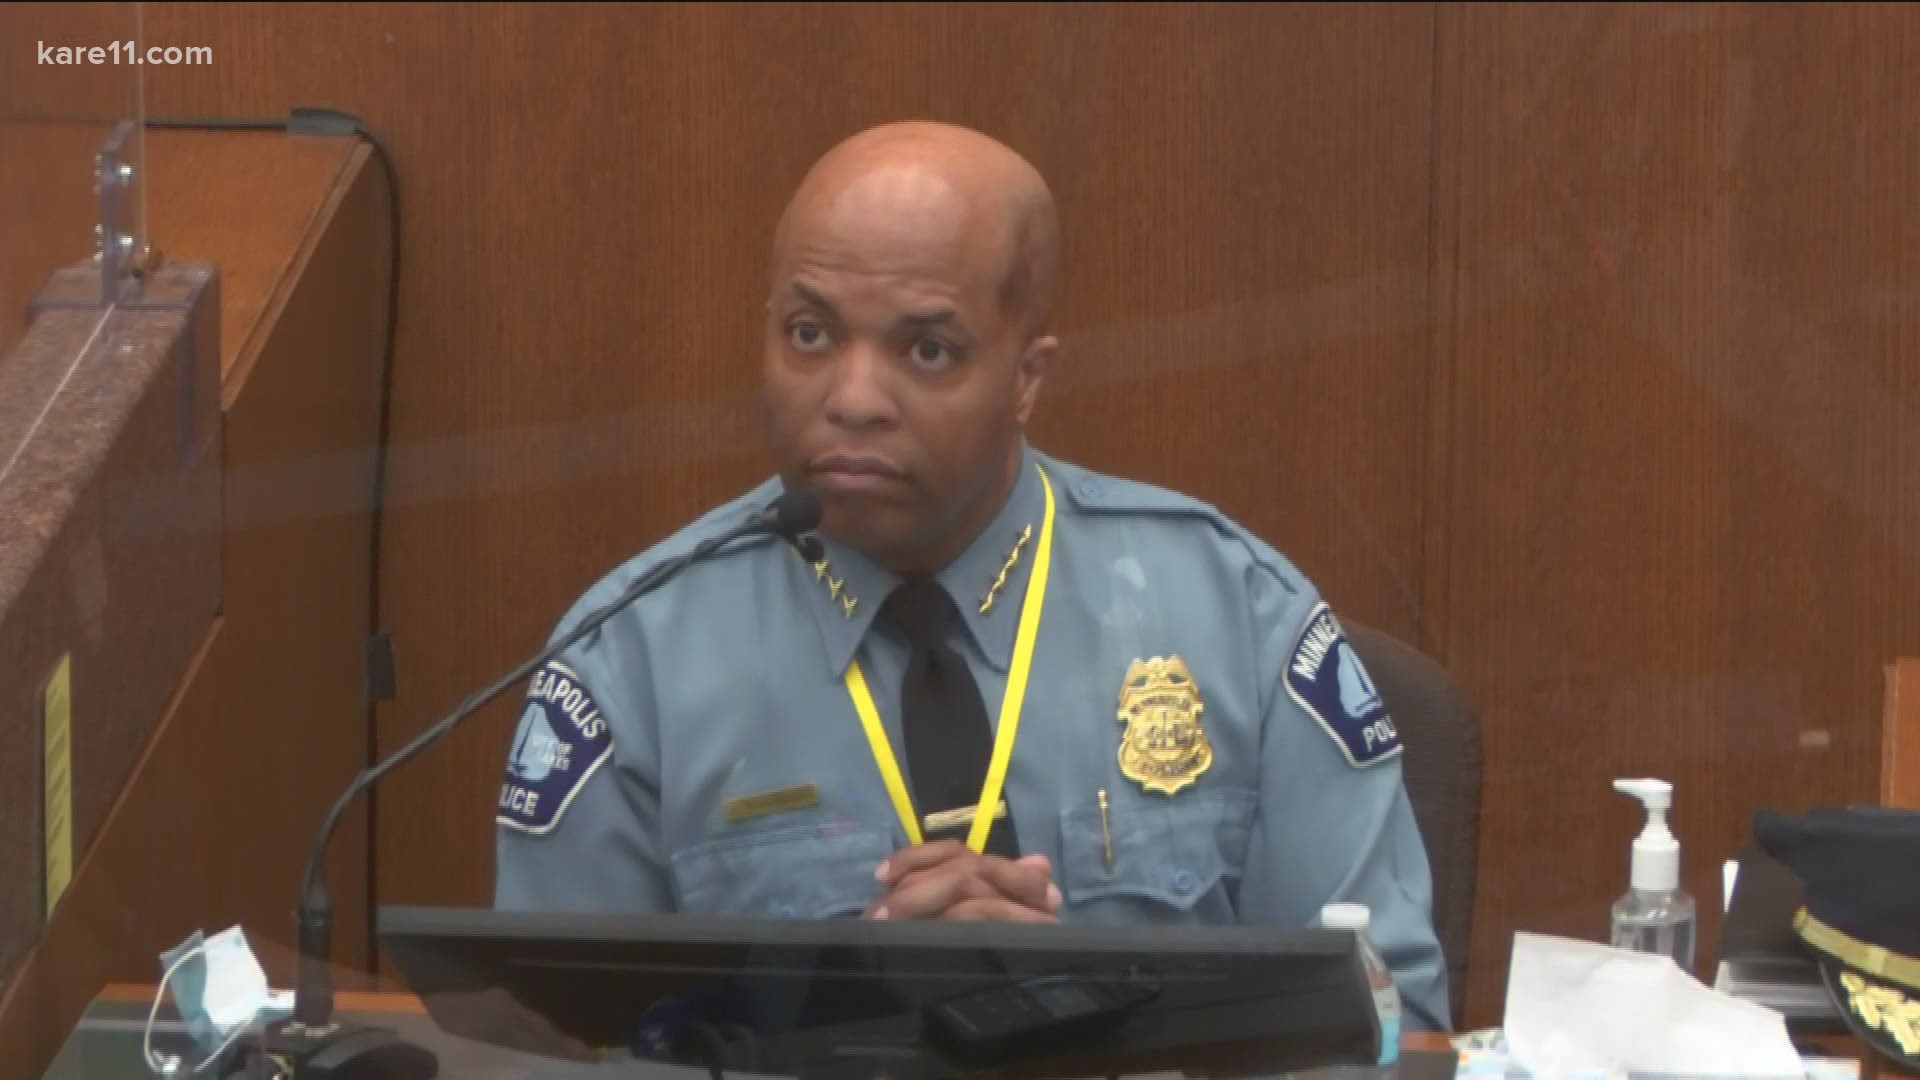 The jury spent most of the day hearing from Chief Medaria Arradondo, who said former officer Chauvin violated several policies when he restrained George Floyd